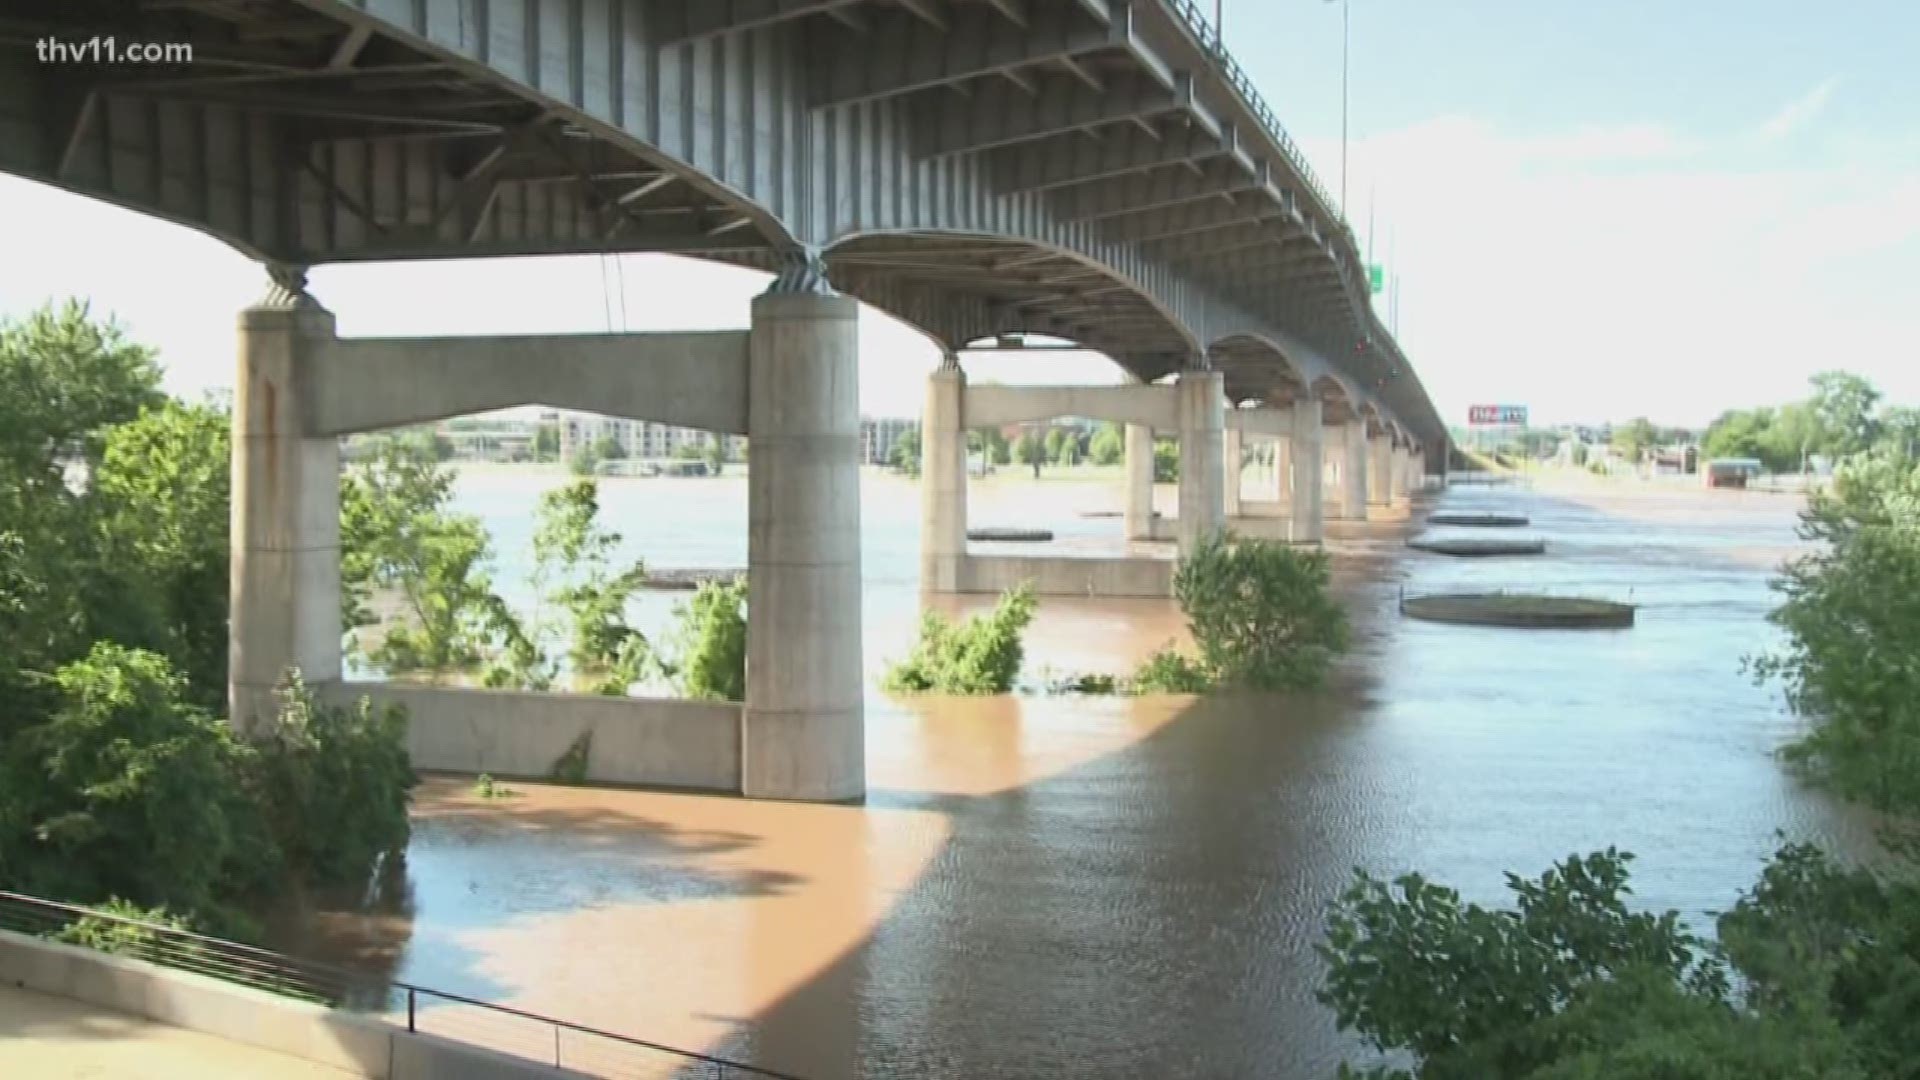 The Arkansas River in Little Rock is expected to crest at 29’ on Wednesday, June 5. As waters rise, officials want to ensure residents are prepared.